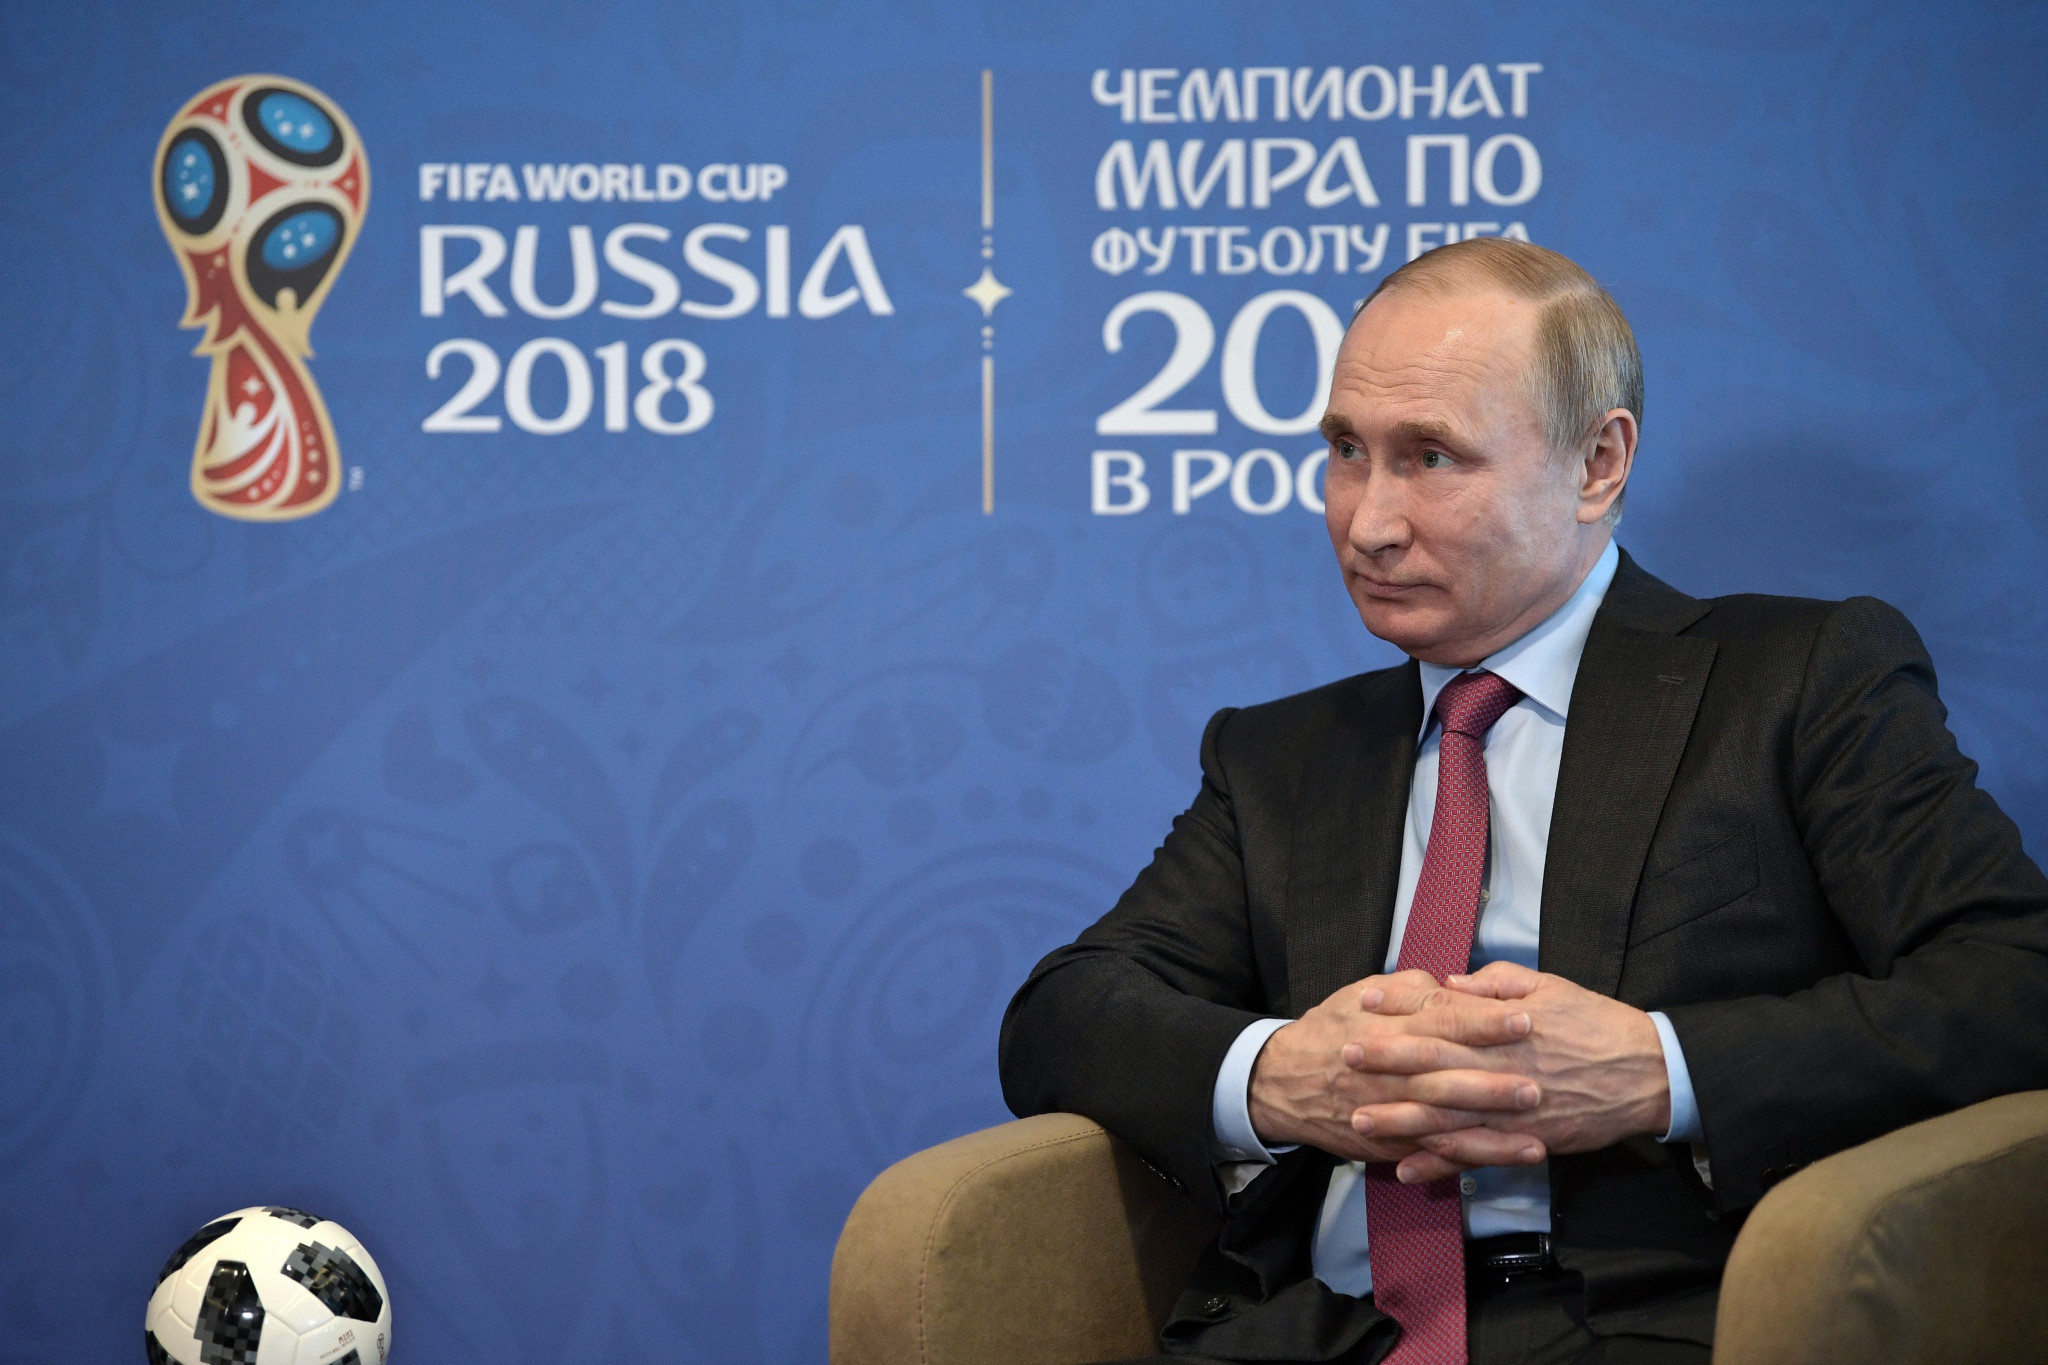 Putin to attend FIFA Congress before World Cup opening